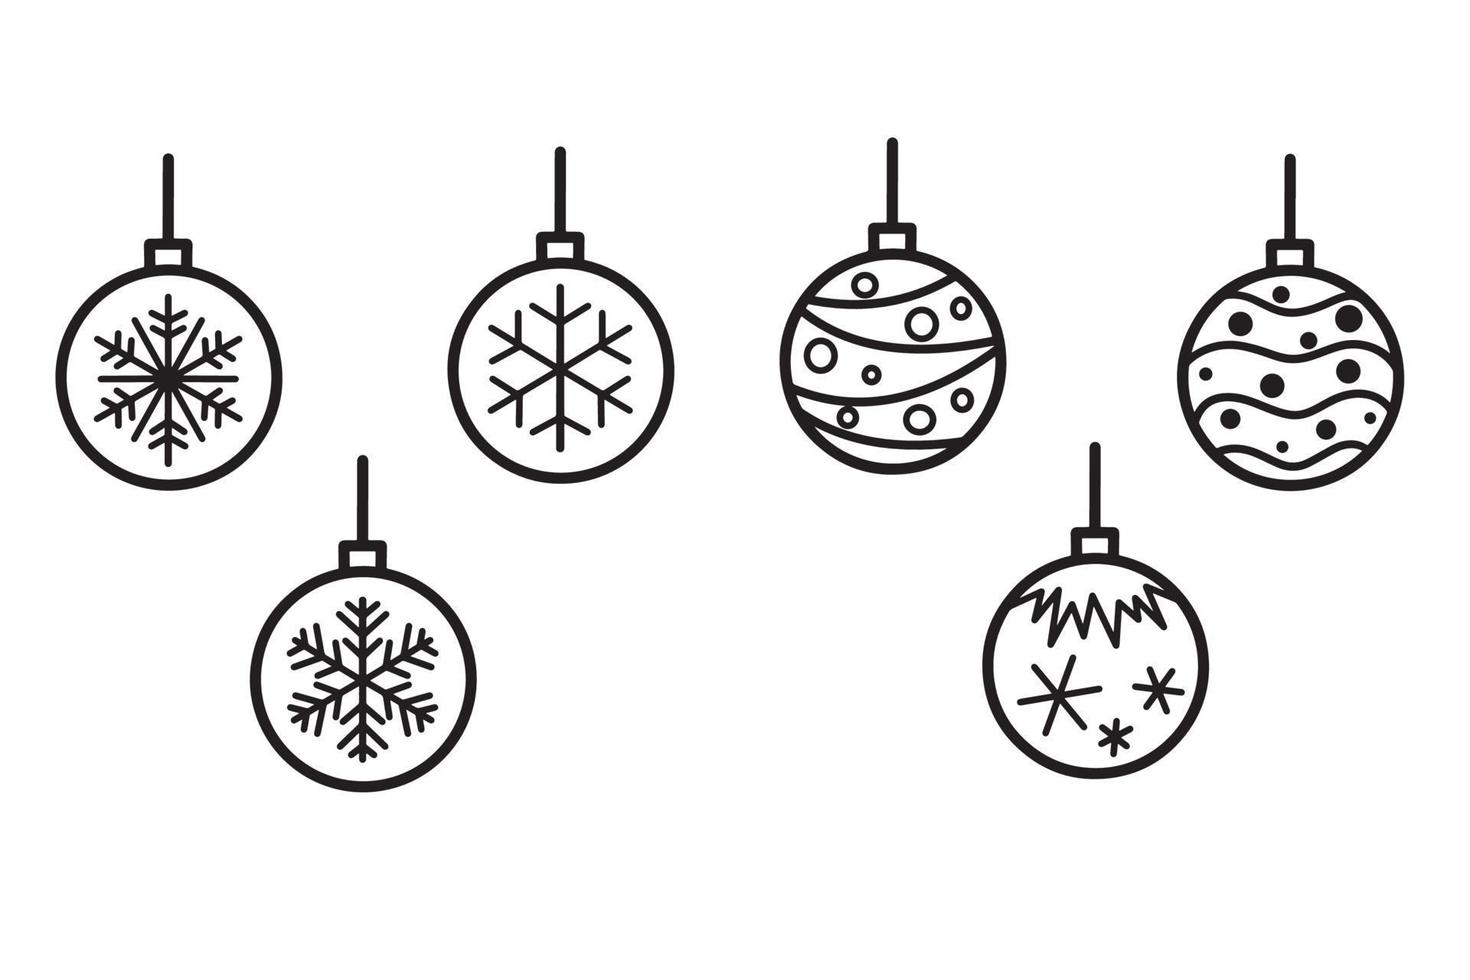 set of chirstmas icons set on white background vector